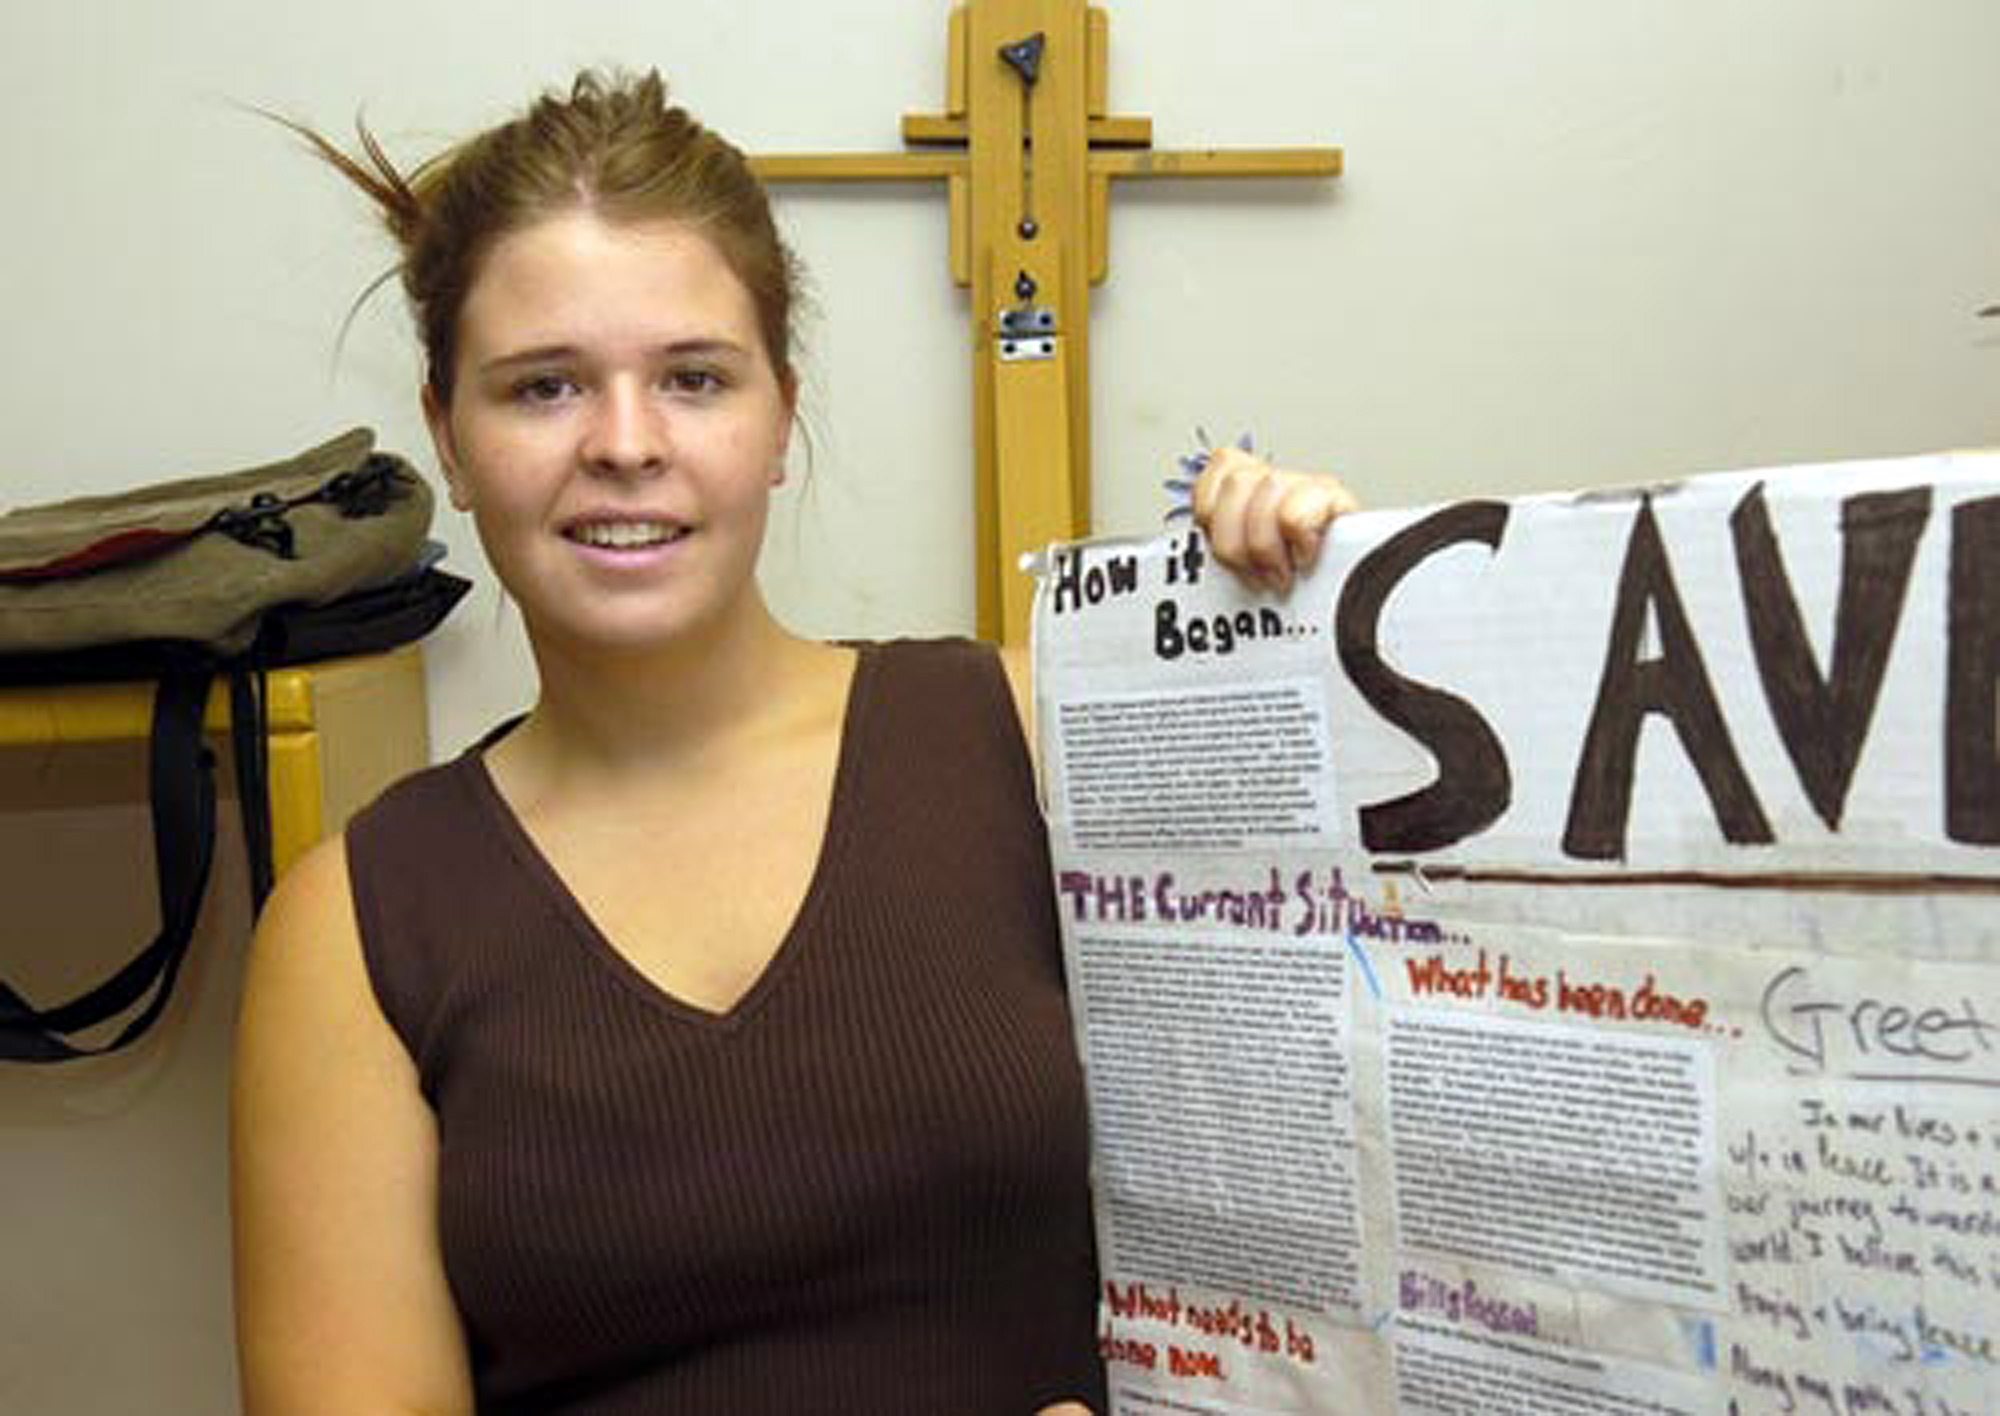 Kayla Mueller, the American aid worker who was held hostage killed